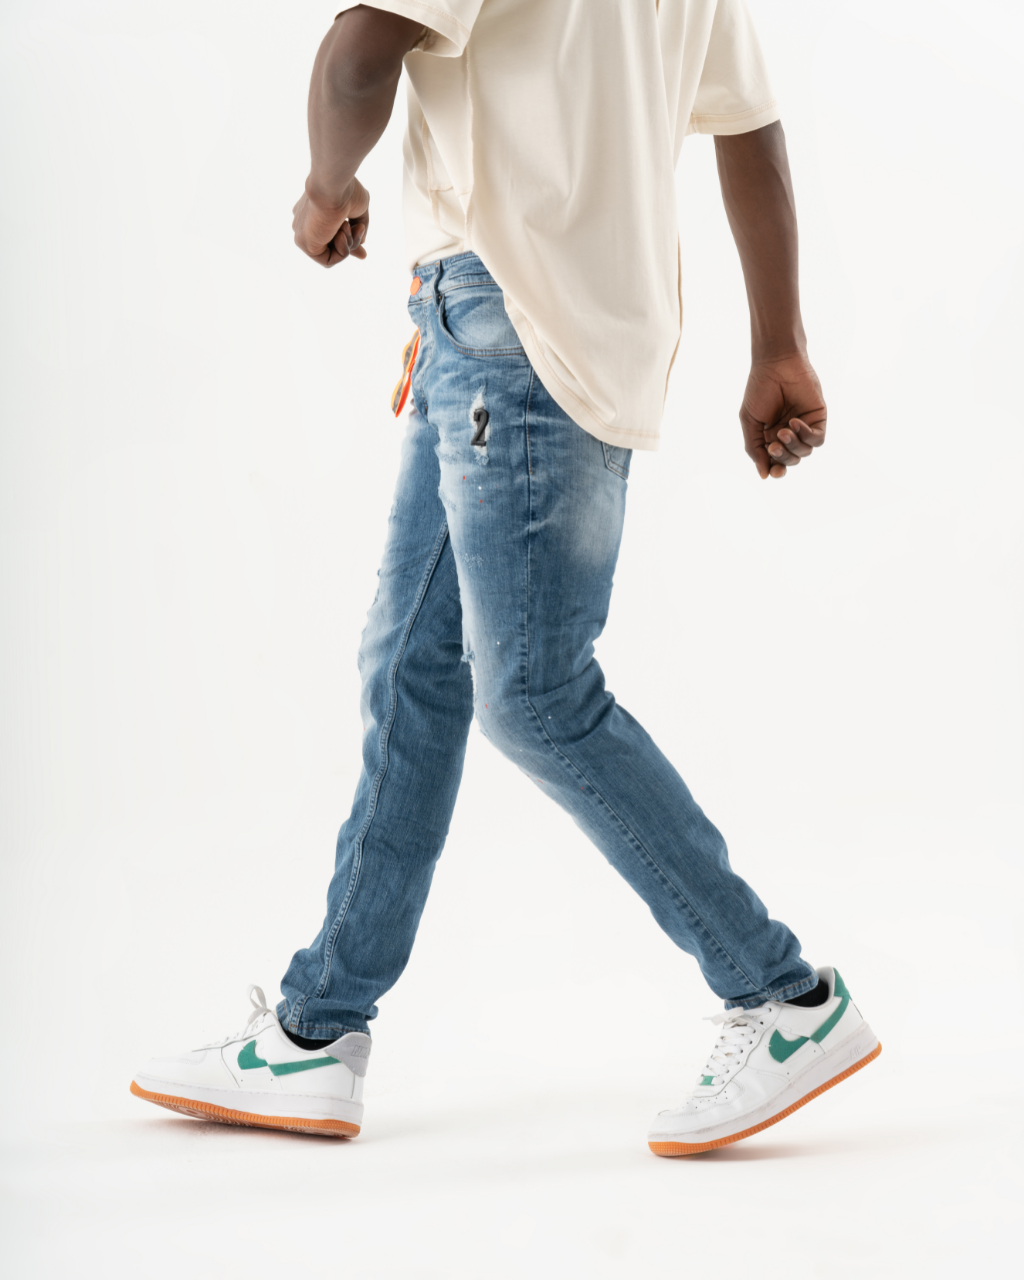 A man in ripped jeans and sneakers walking on a TEZAR background.